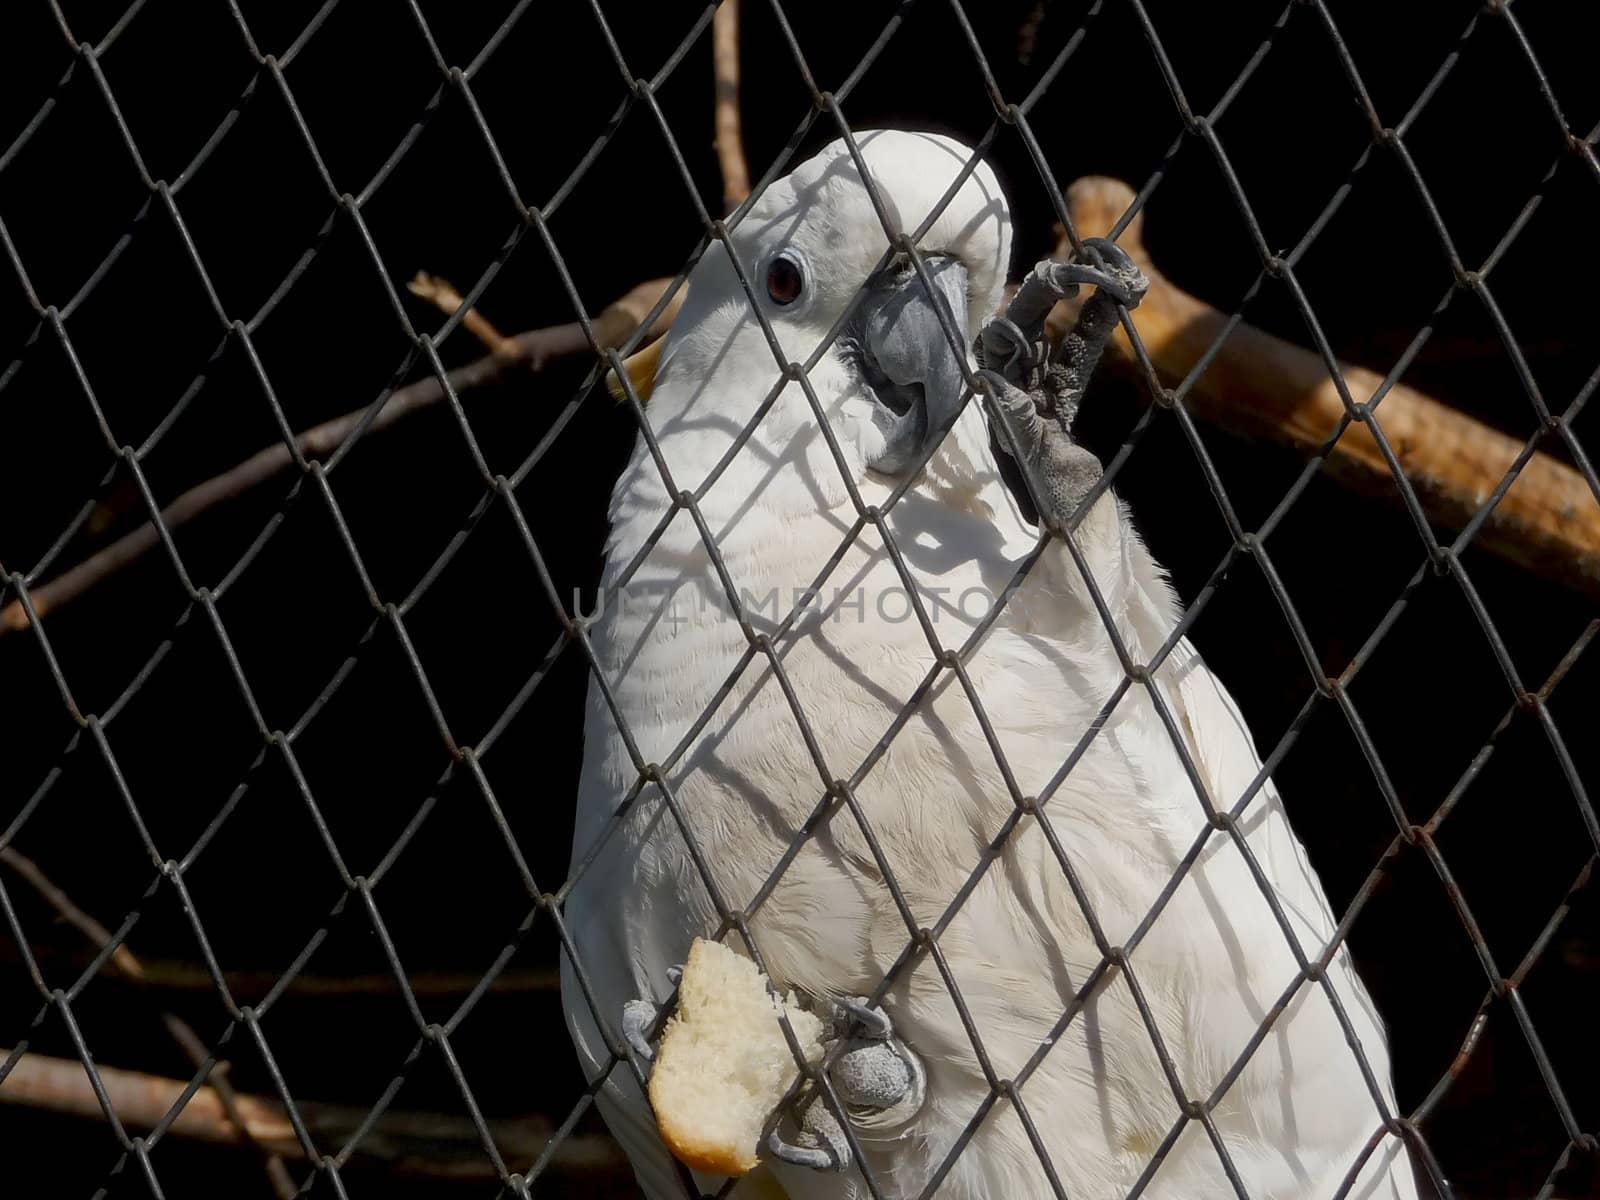 Parrot cockatoo by tomatto